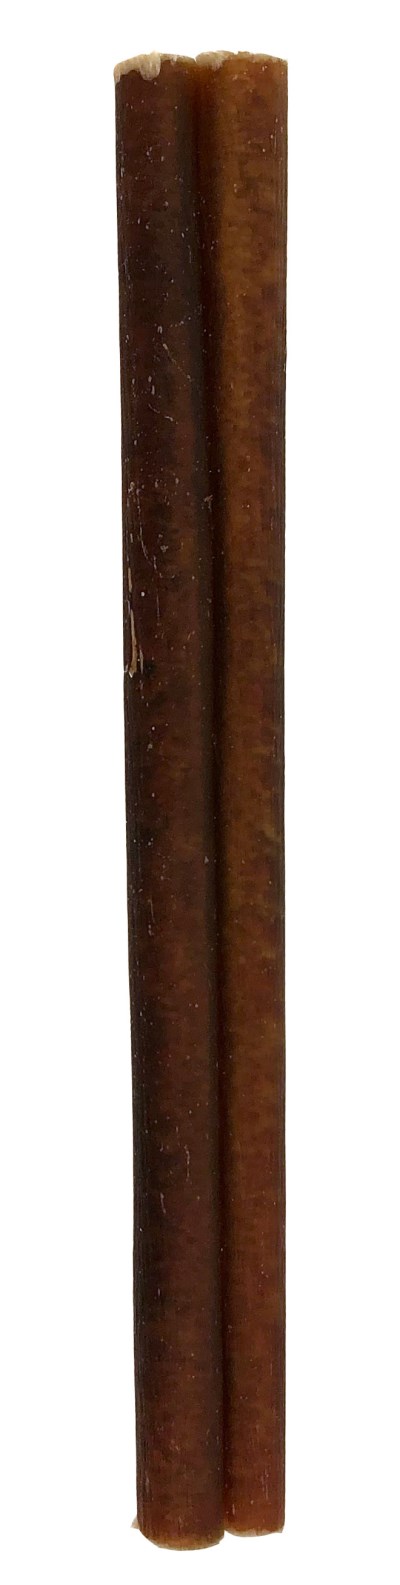 Made In South America Dog Chew - Bully Stick - 6 inch-each